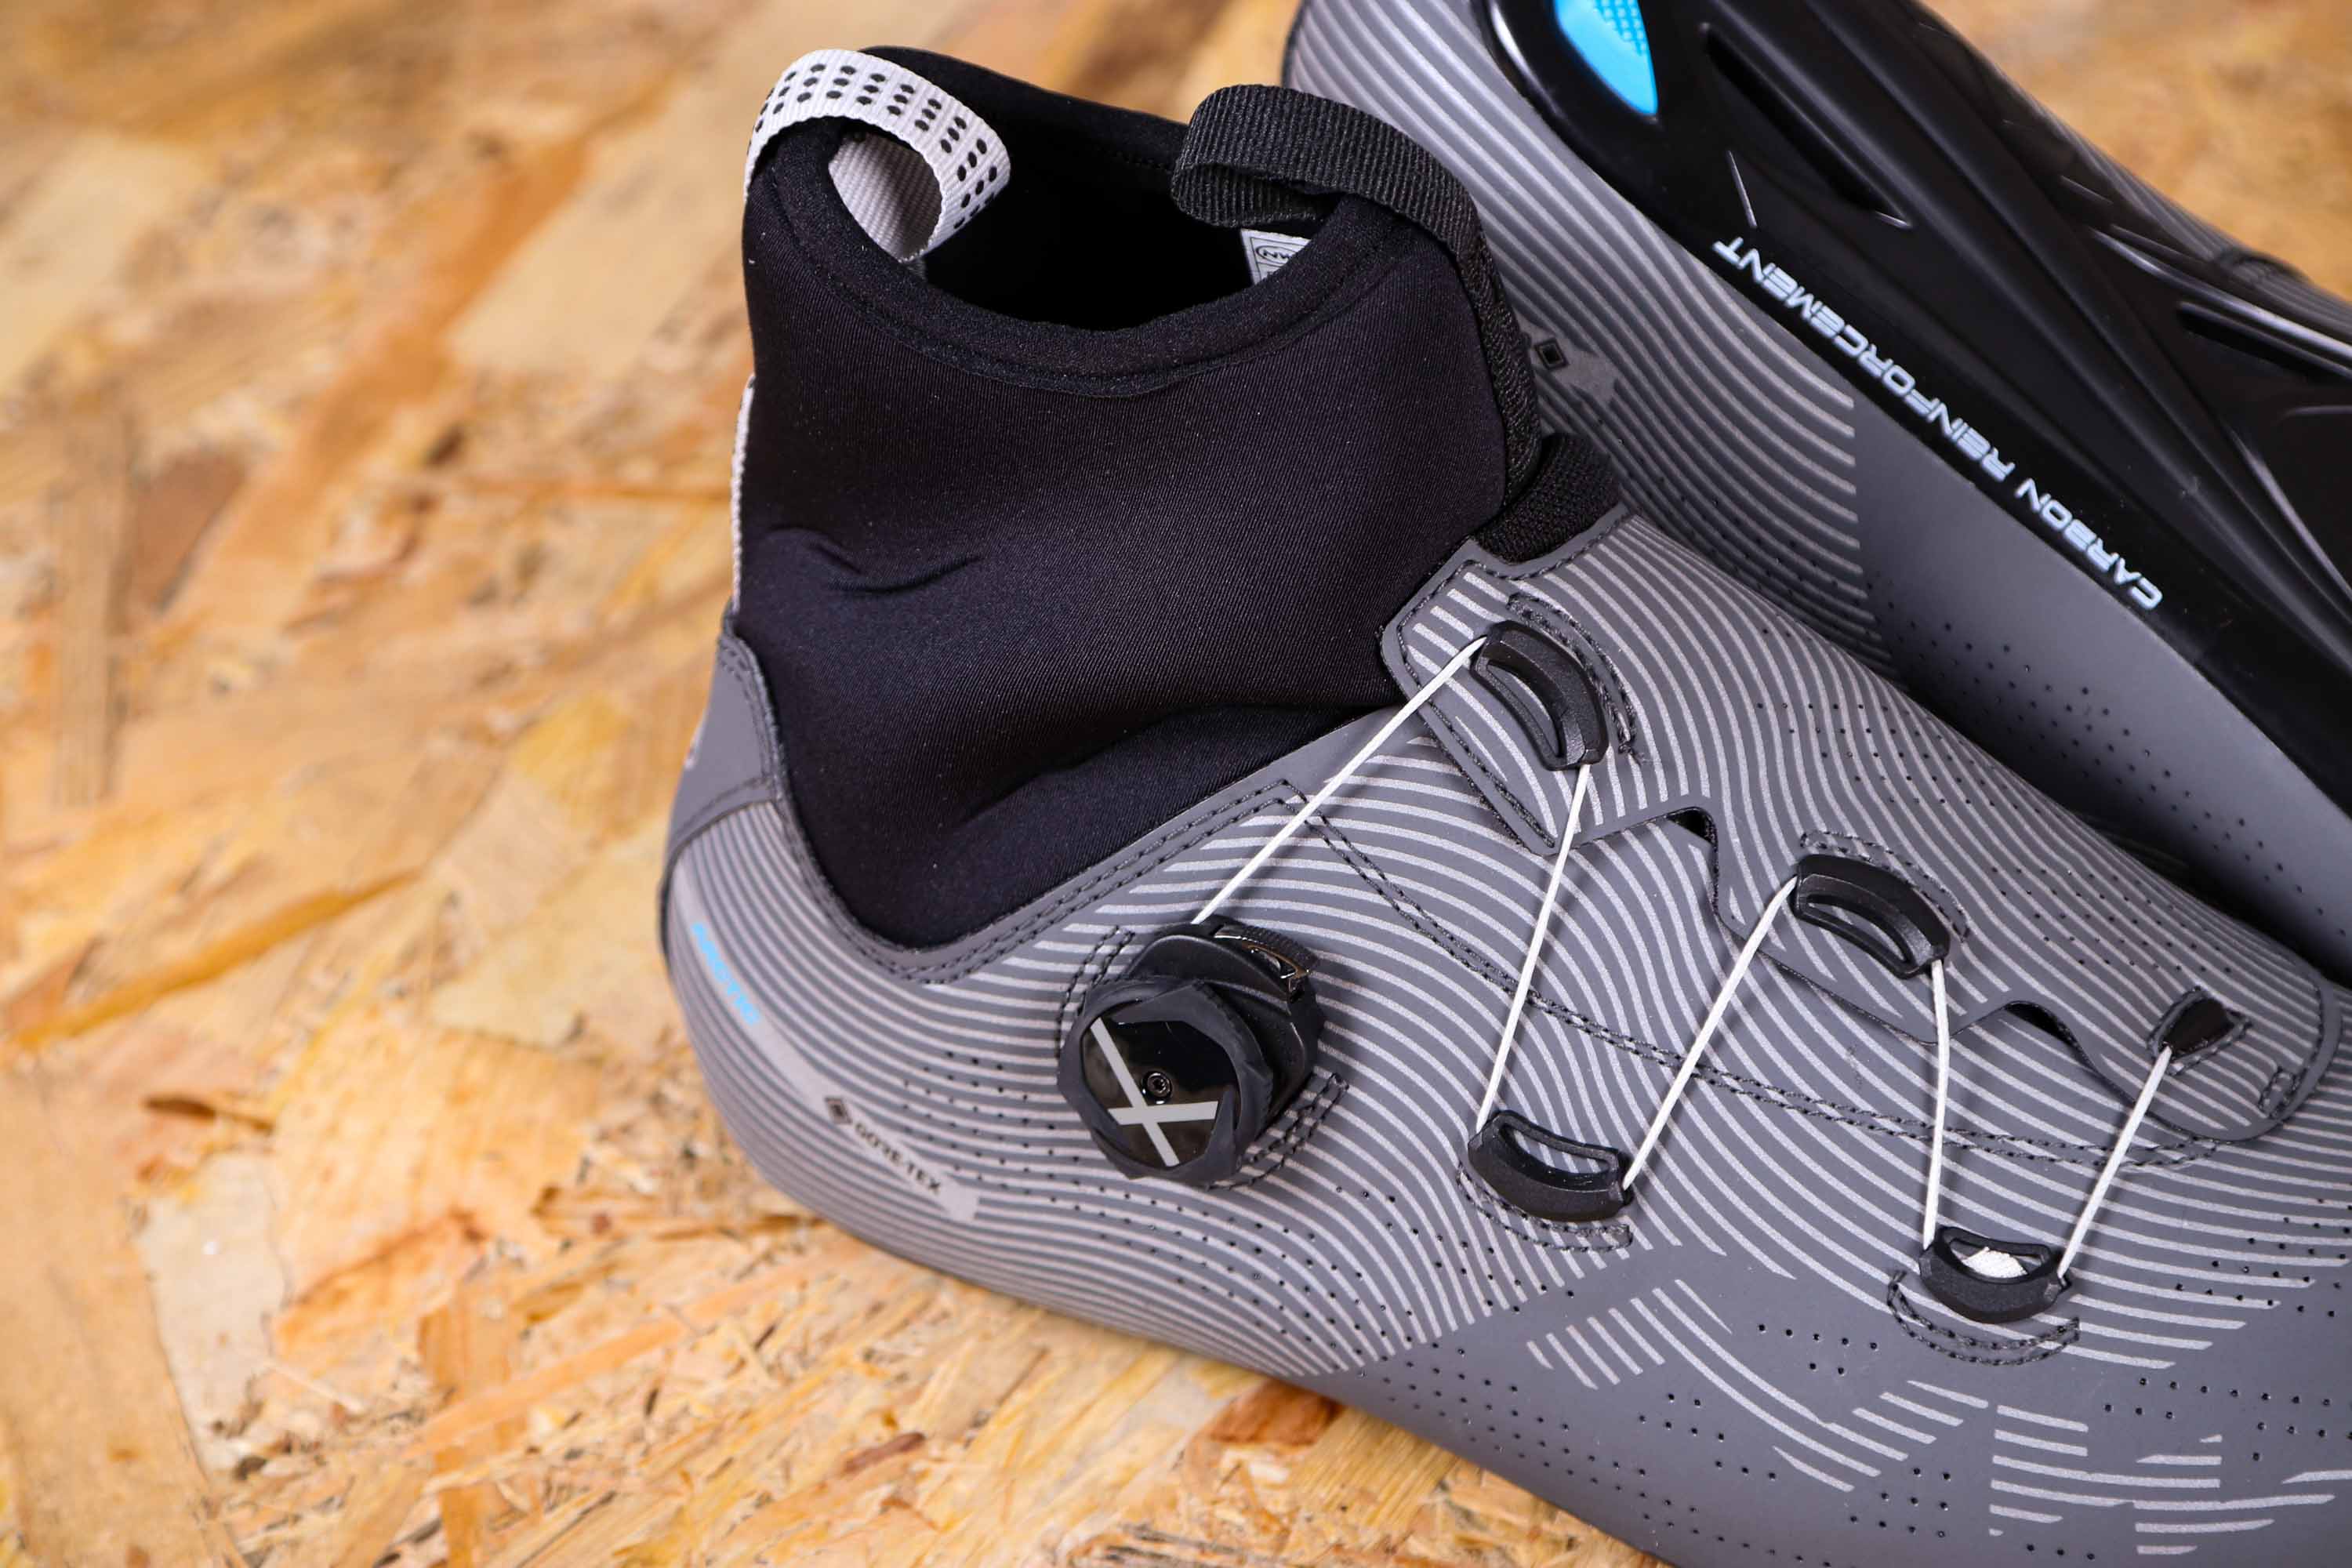 Anth Road Winter Boots Details about   NorthWave Celcius R Arctic GTX Reflective 